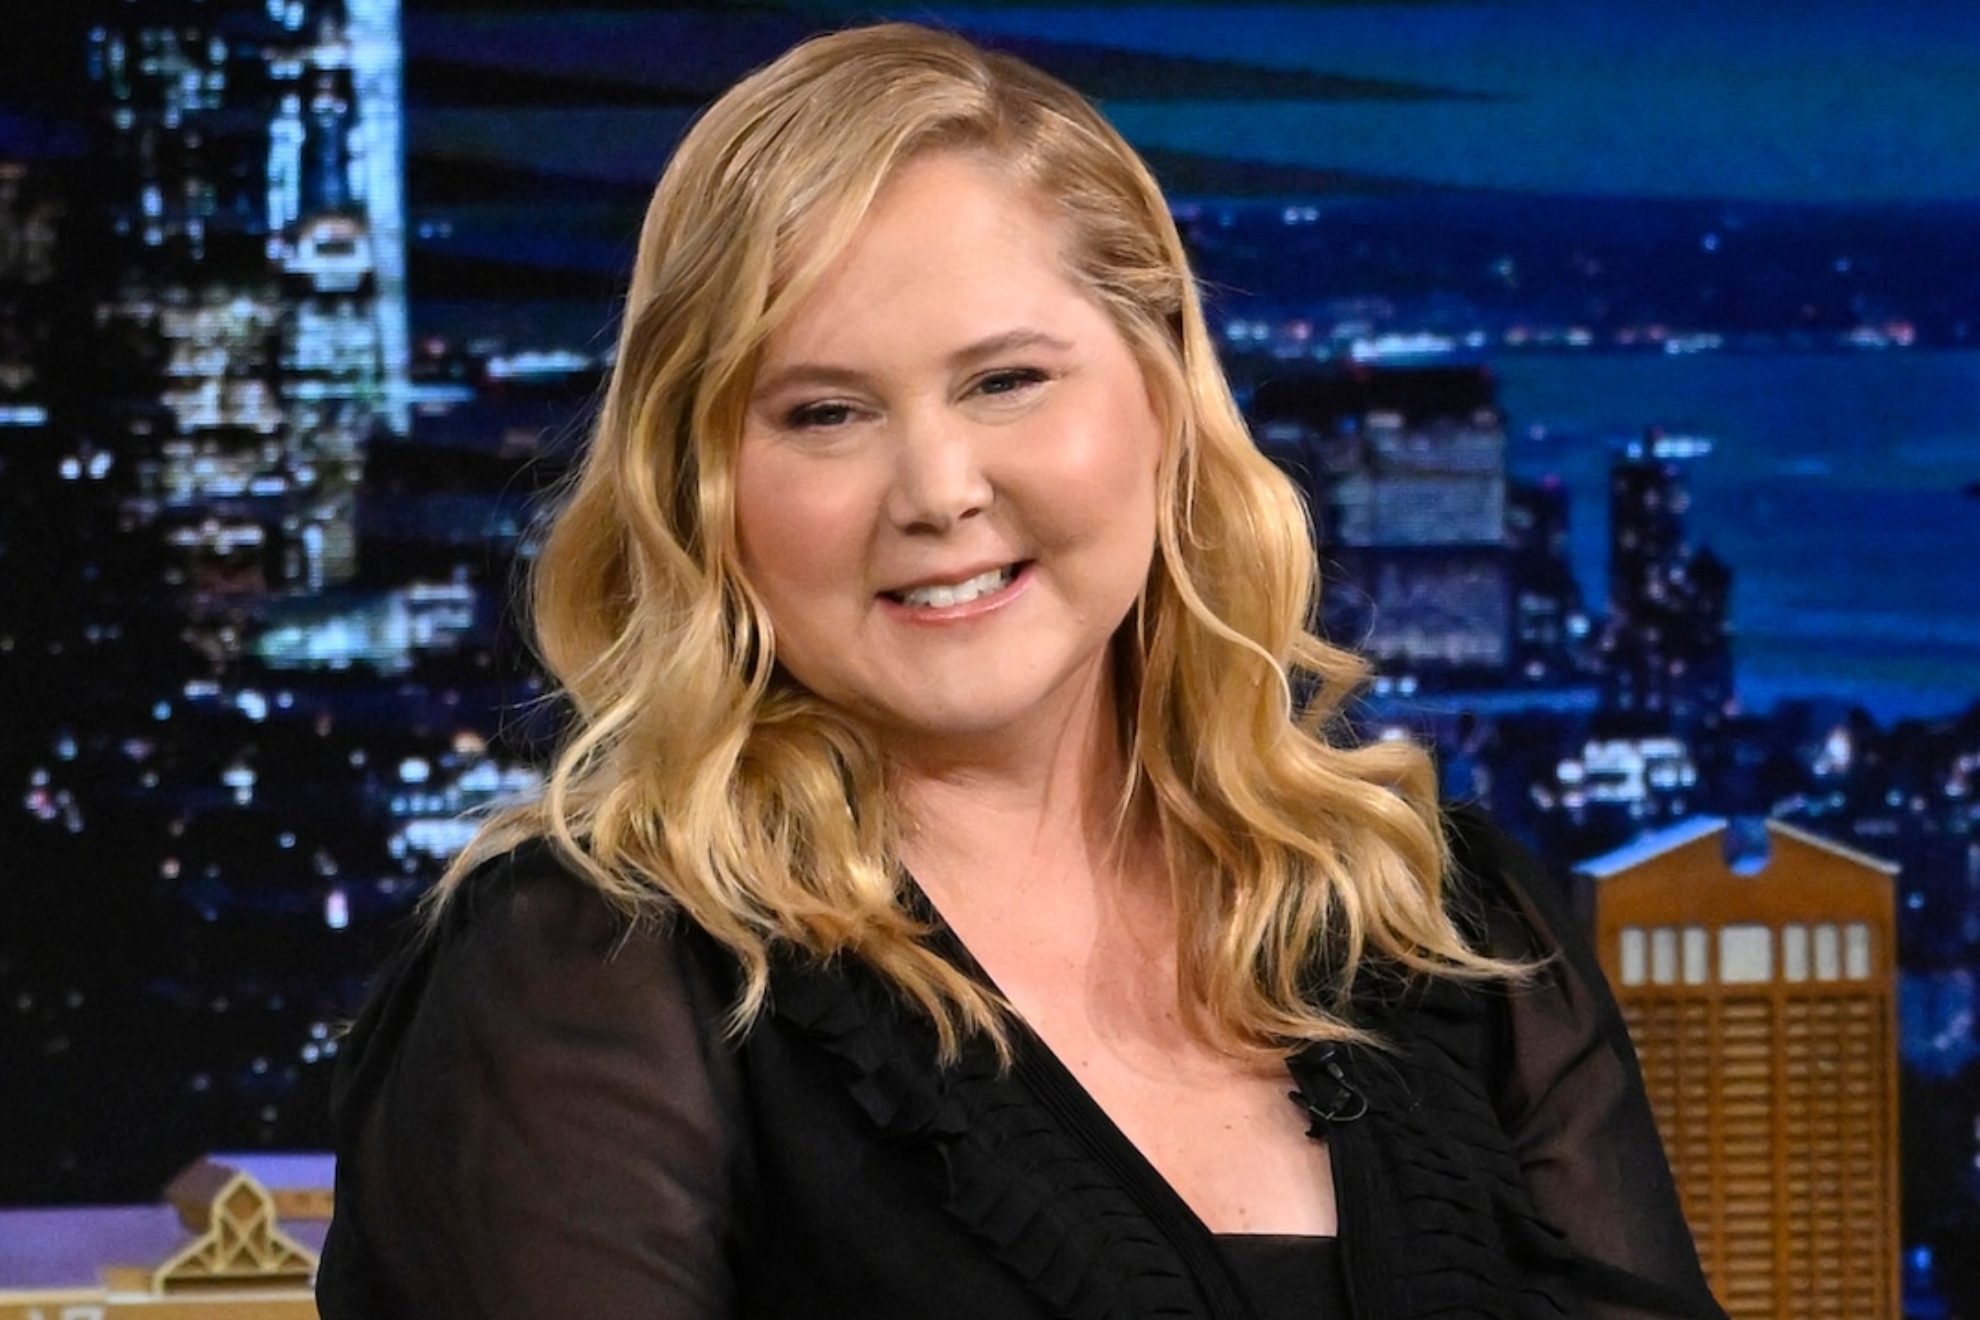 Amy Schumer on The Tonight Show